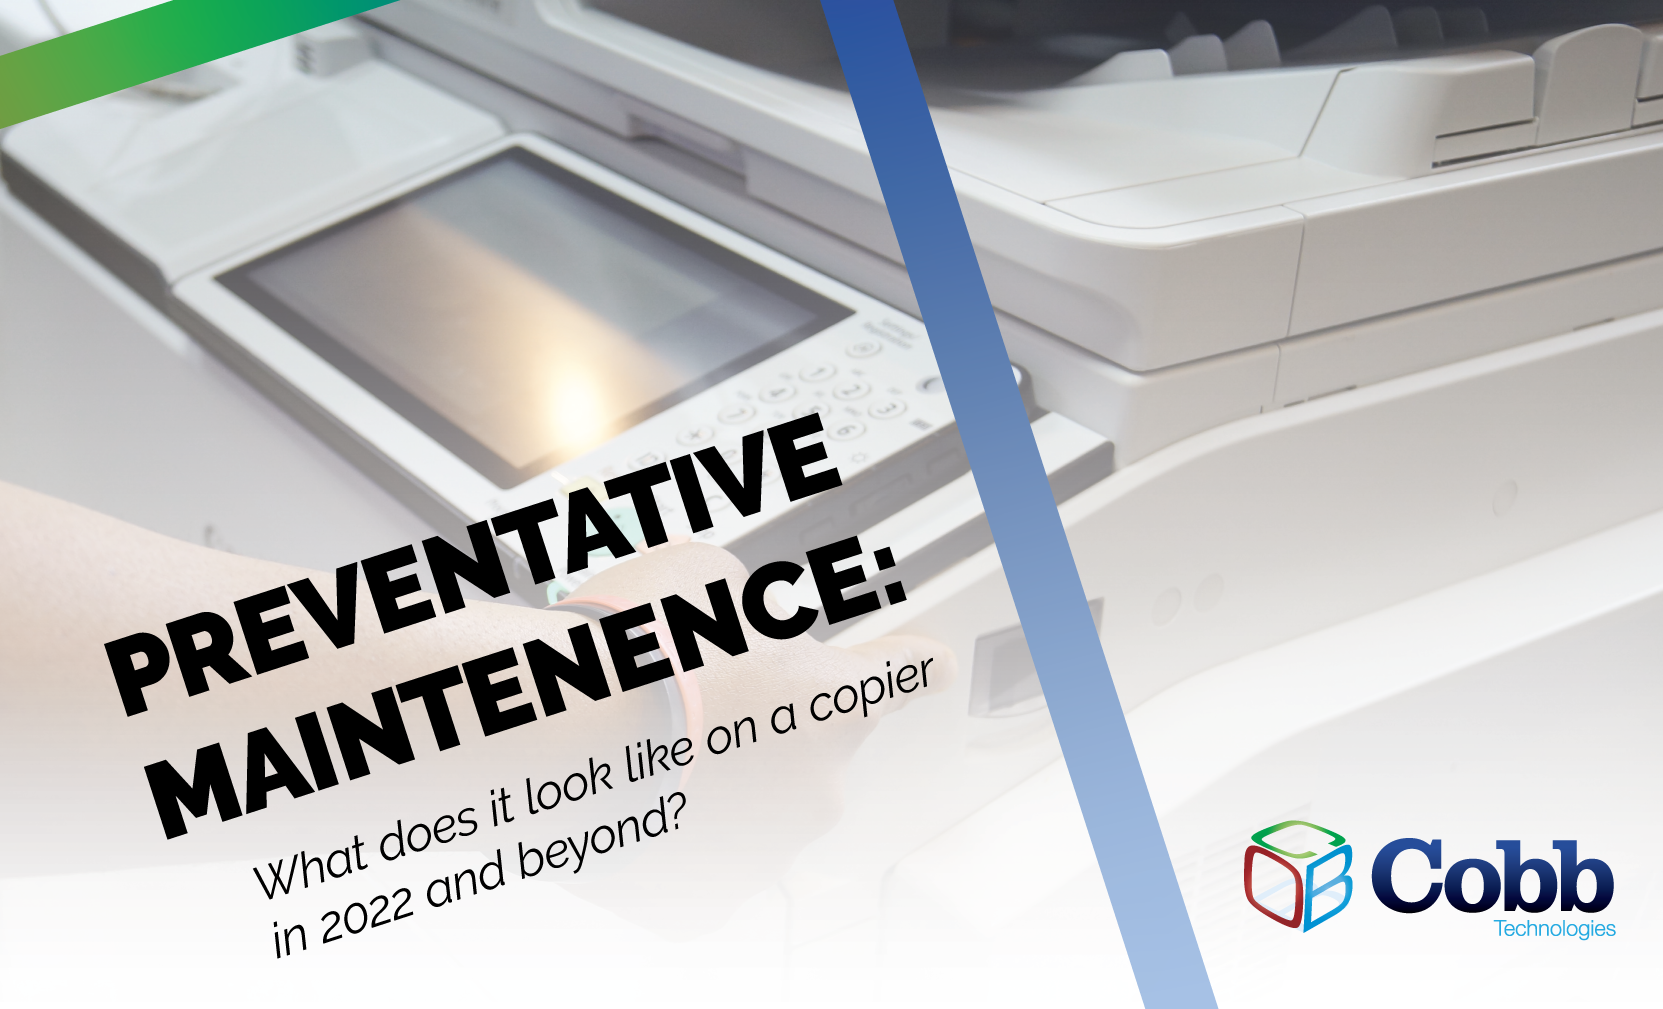 What Does Preventative Maintenance on a Copier Look Like in 2022 and Beyond?